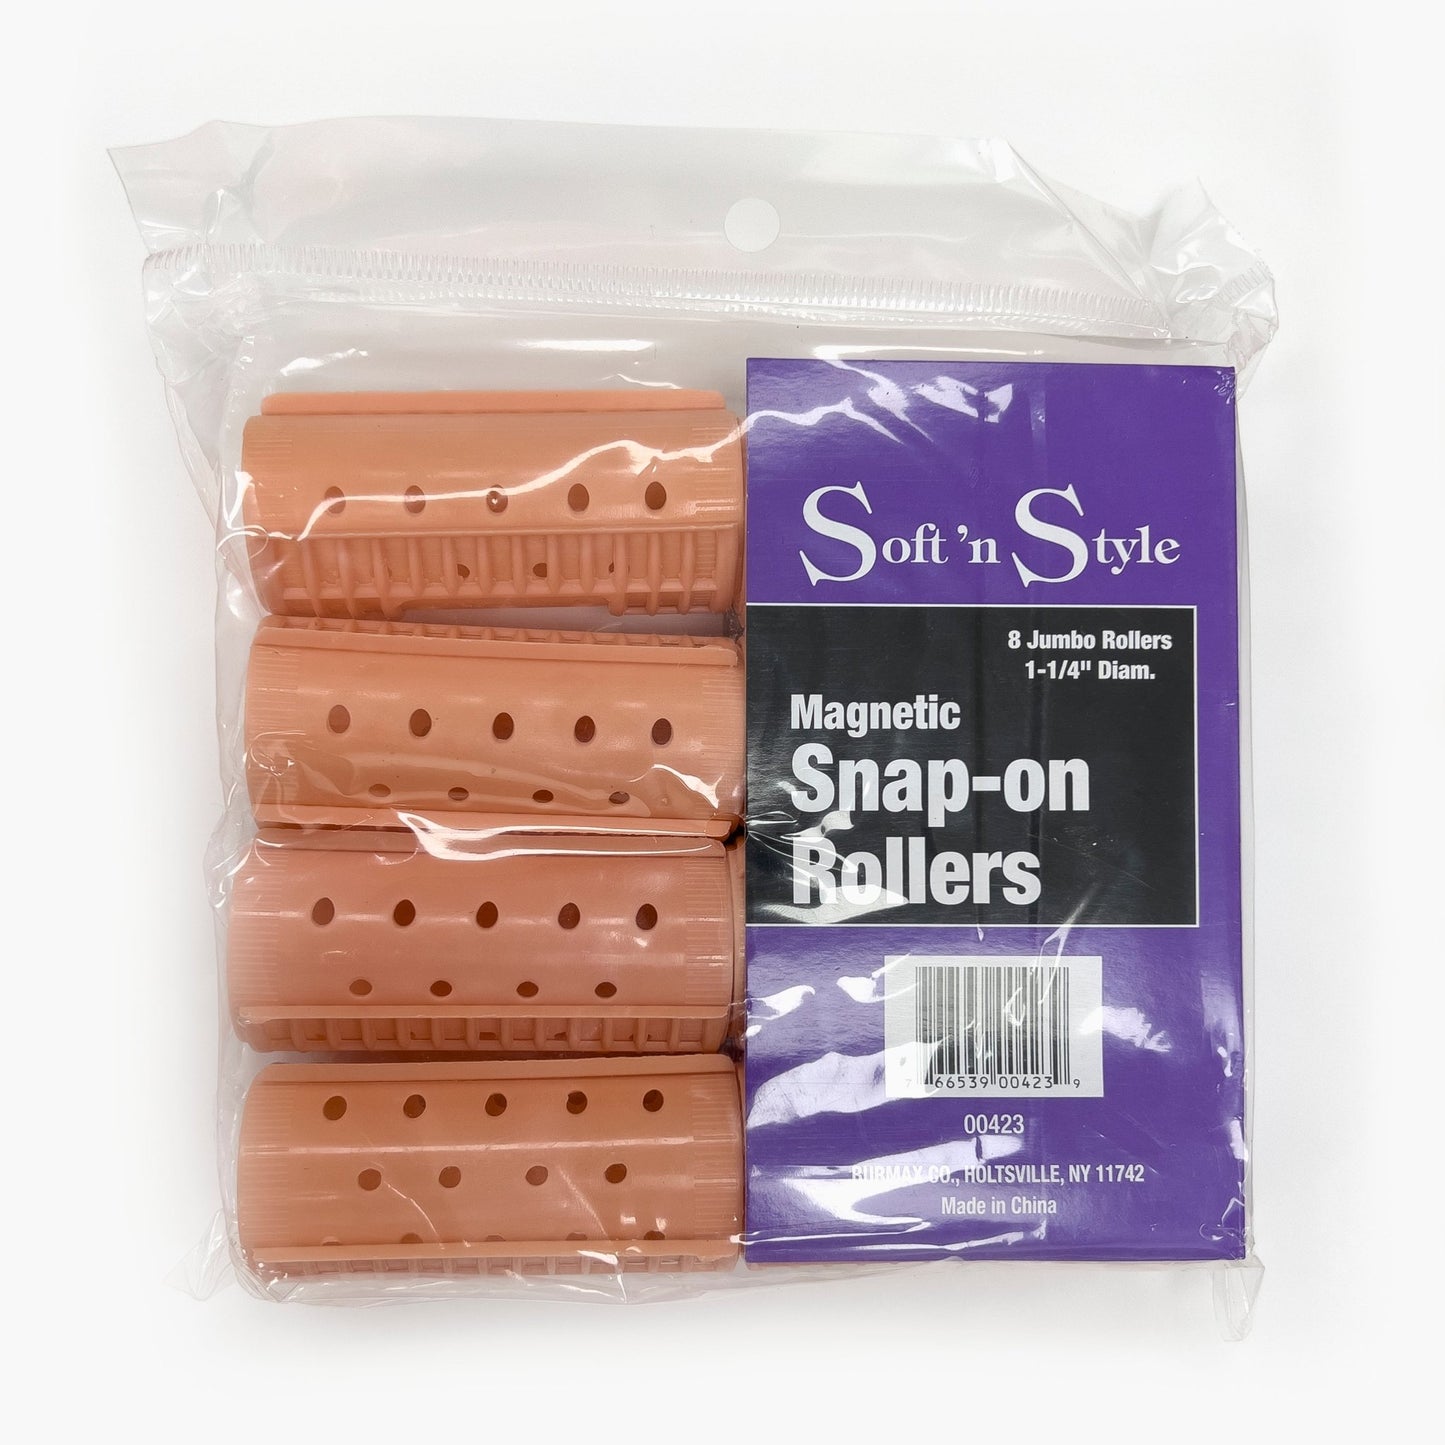 Magnetic Snap-on Rollers | 1-1/4" Diam. | 8 Jumbo Rollers | 00423 | SOFT N STYLE - SH Salons